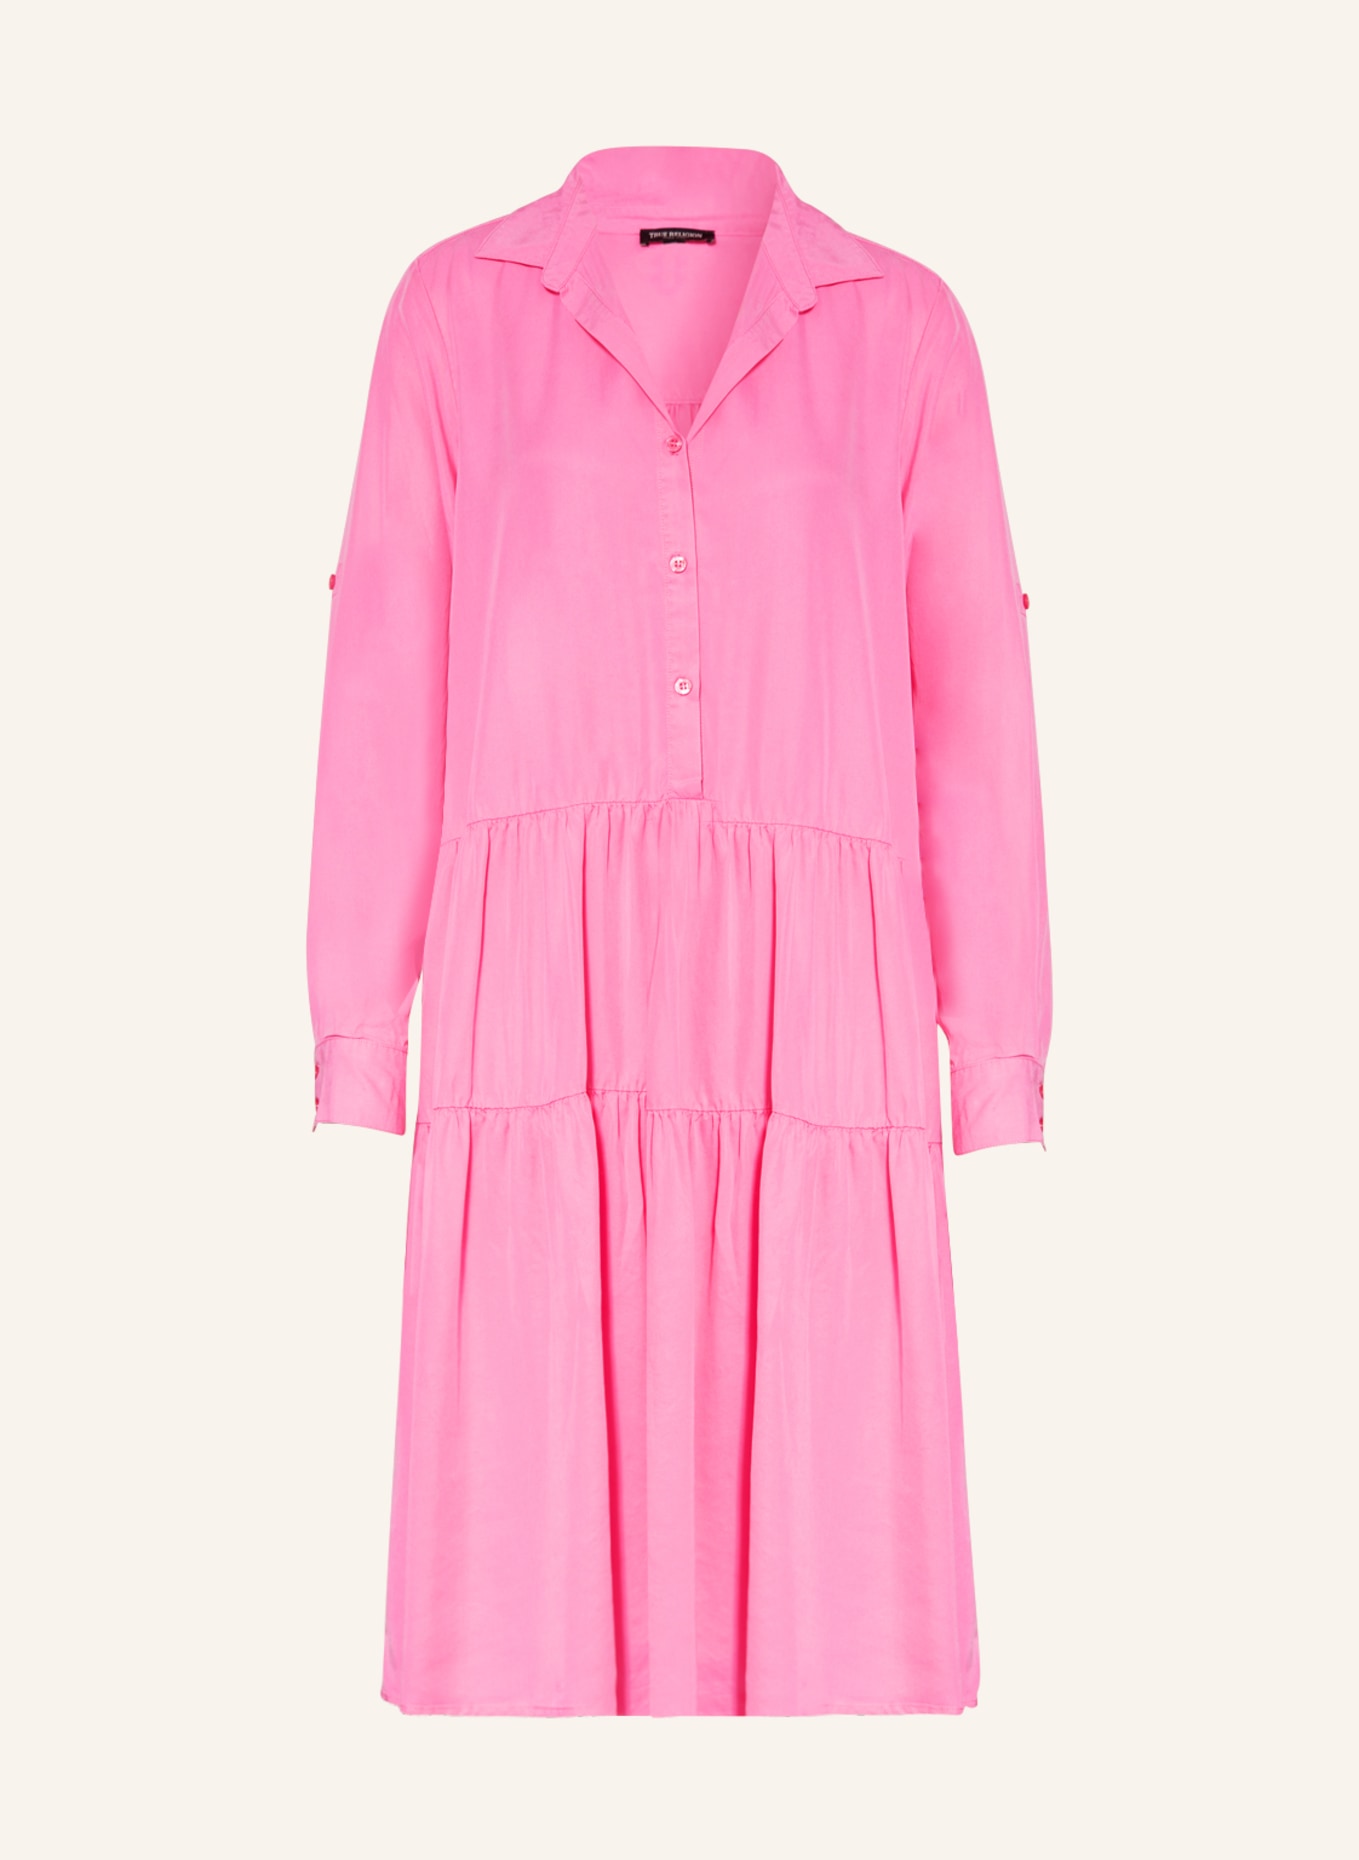 TRUE RELIGION Dress with frills, Color: PINK (Image 1)